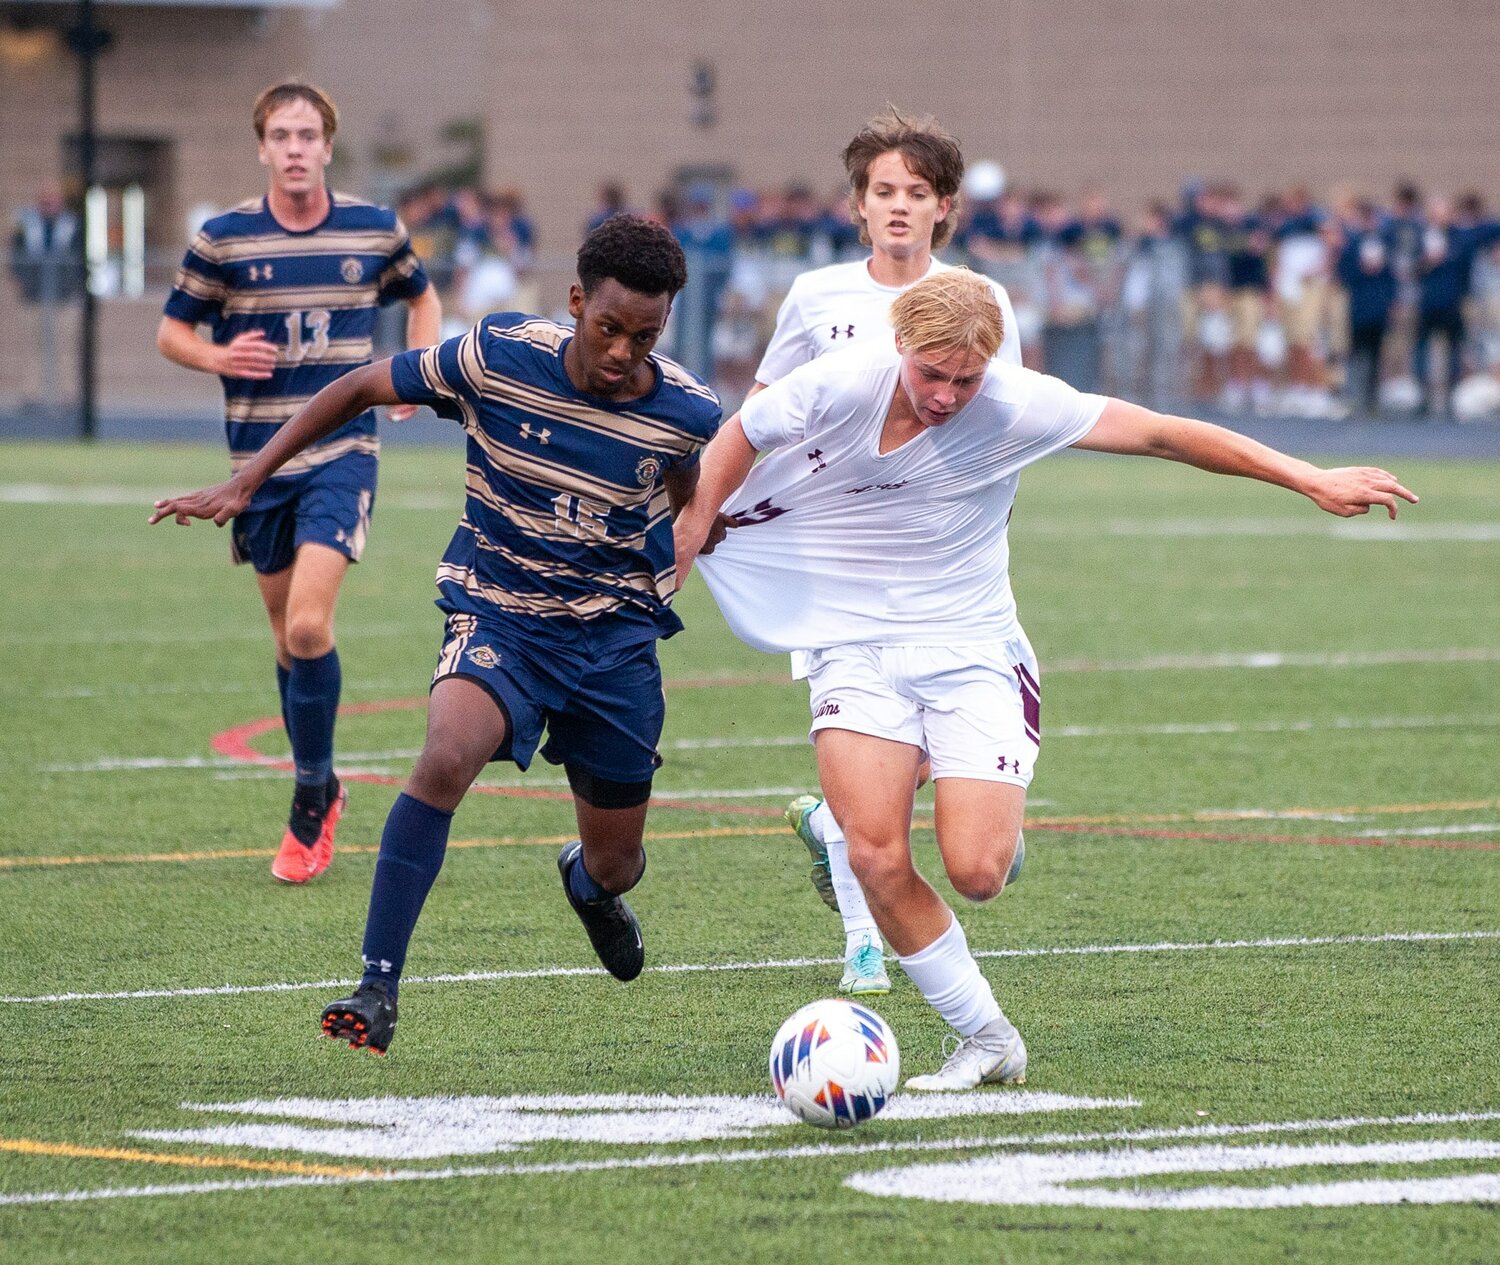 Severna Park’s Eneko Allen and Broadneck’s Tanner Boone fought for possession during Tuesday’s game.